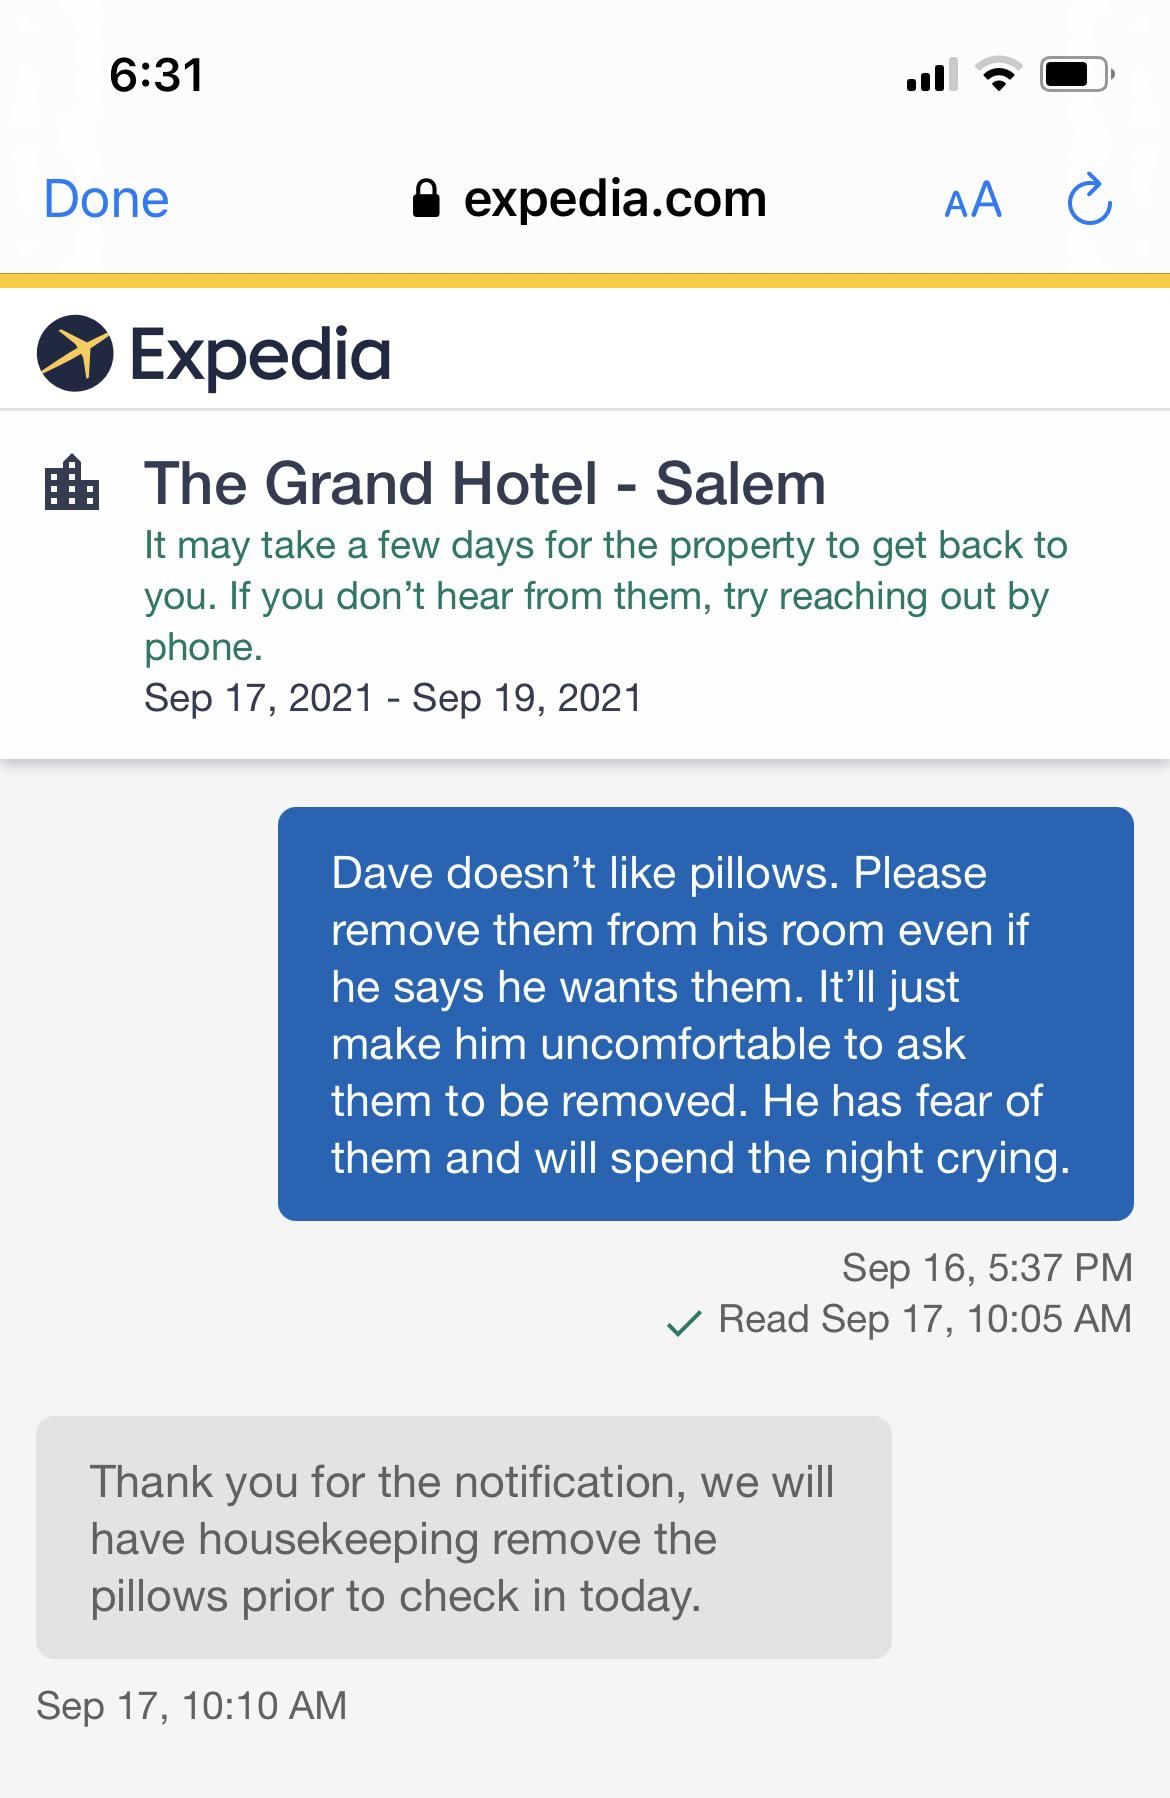 Someone booked a hotel with my email address. Gotta message the hotel about his pillow fear.